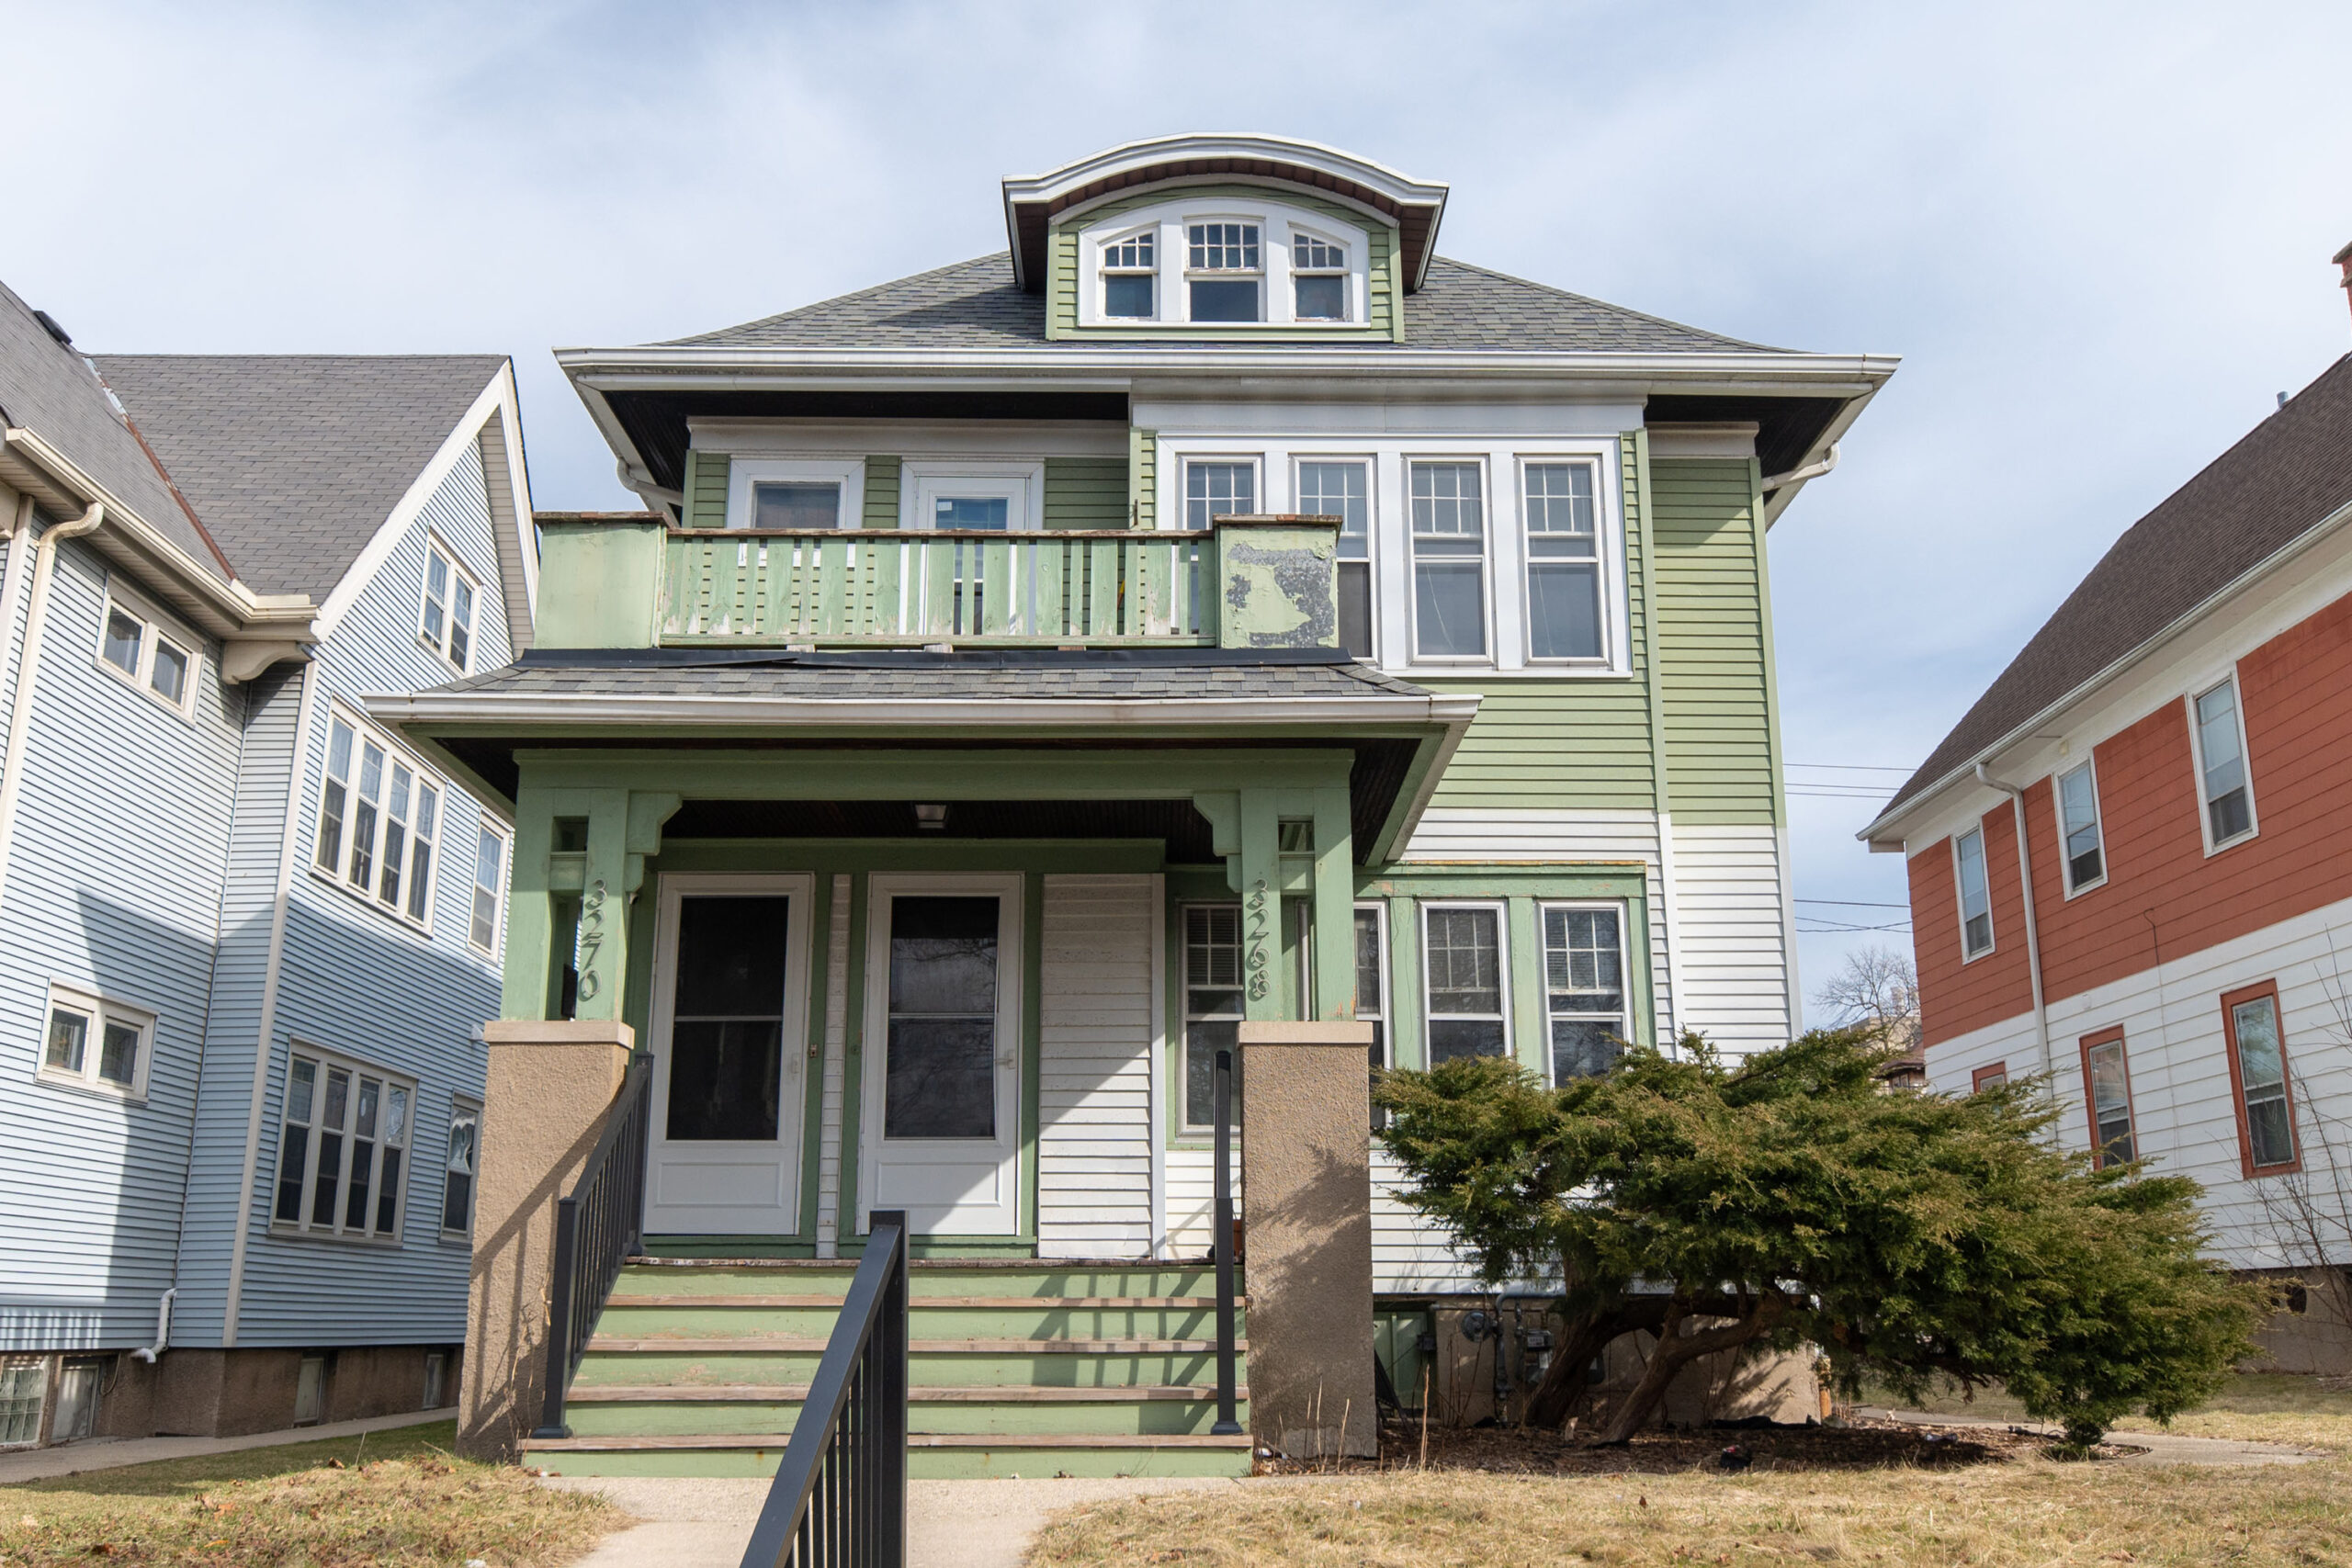  Home for Sale - 3268/3270 N. Oakland Ave. Milwaukee, WI 53211-3050